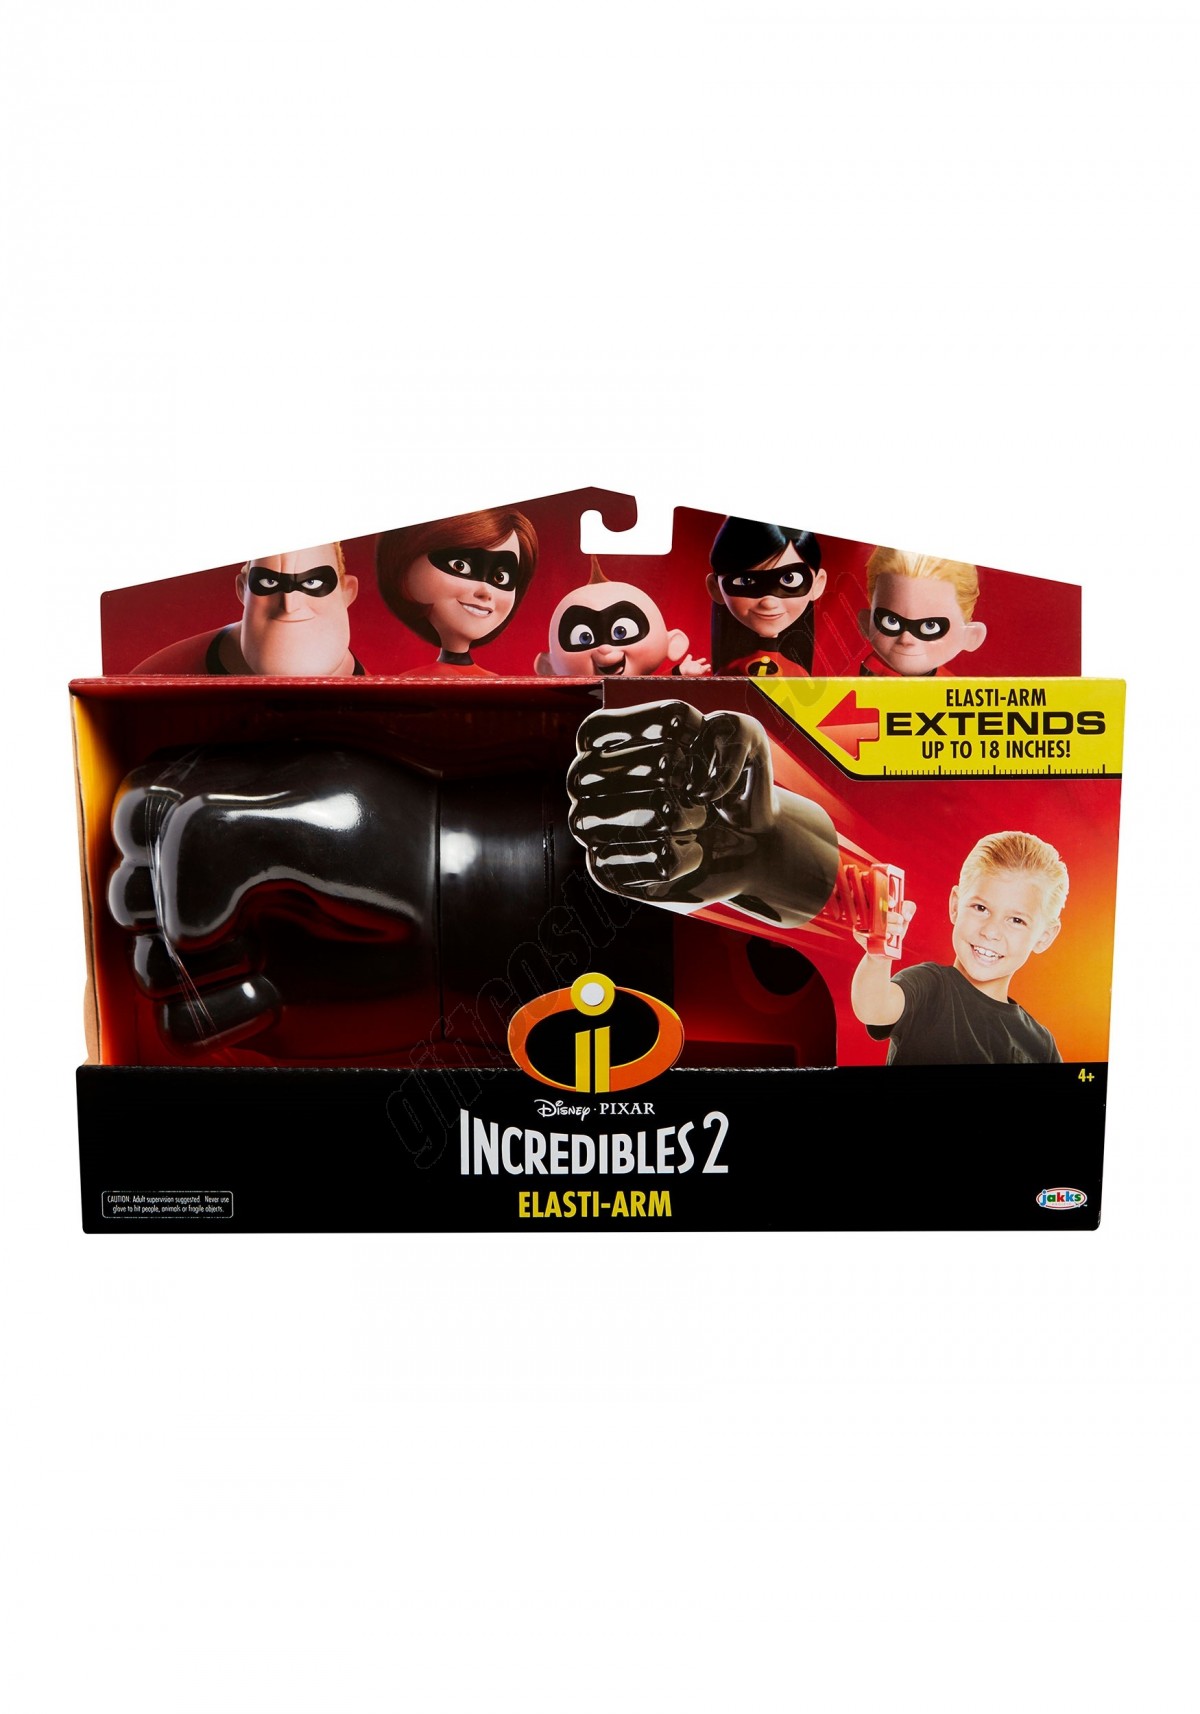 Incredibles 2 Elasti-Arm Child Size Promotions - -3